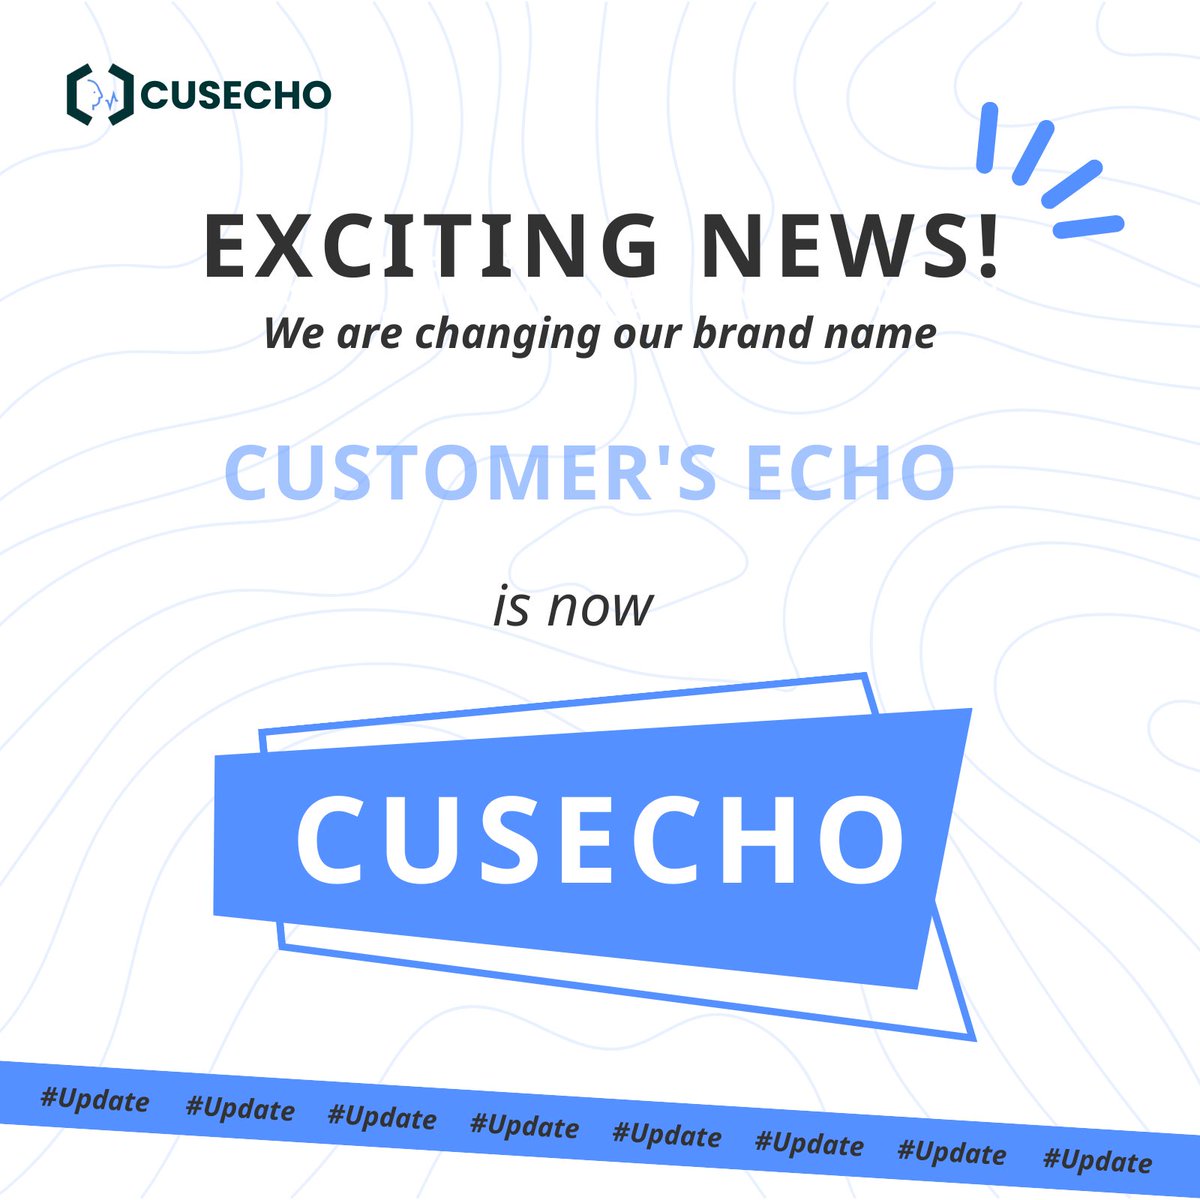 After much anticipation, we are thrilled to announce the change of our brands name, to better reflect our vision and values. 

We’re excited to continue serving you under our new identity 

#businessgrowth #customeranalytics #businessmanagement #explore #cusecho